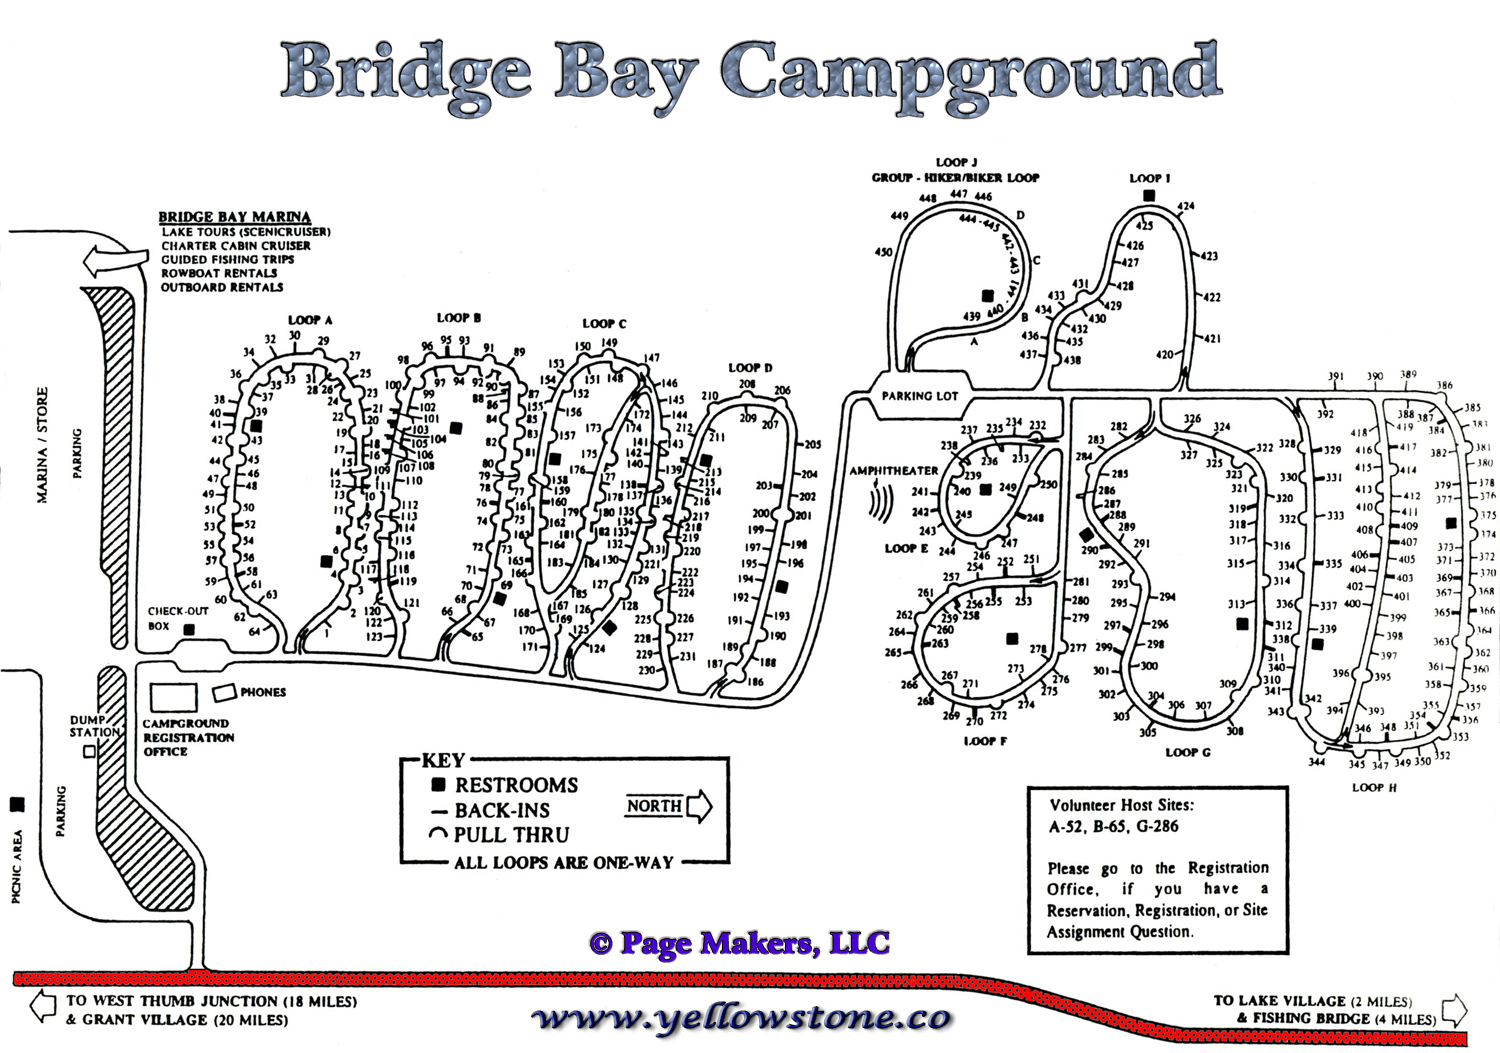 Bridge Bay Campground Map Yellowstone National Park © Page Makers, LLC